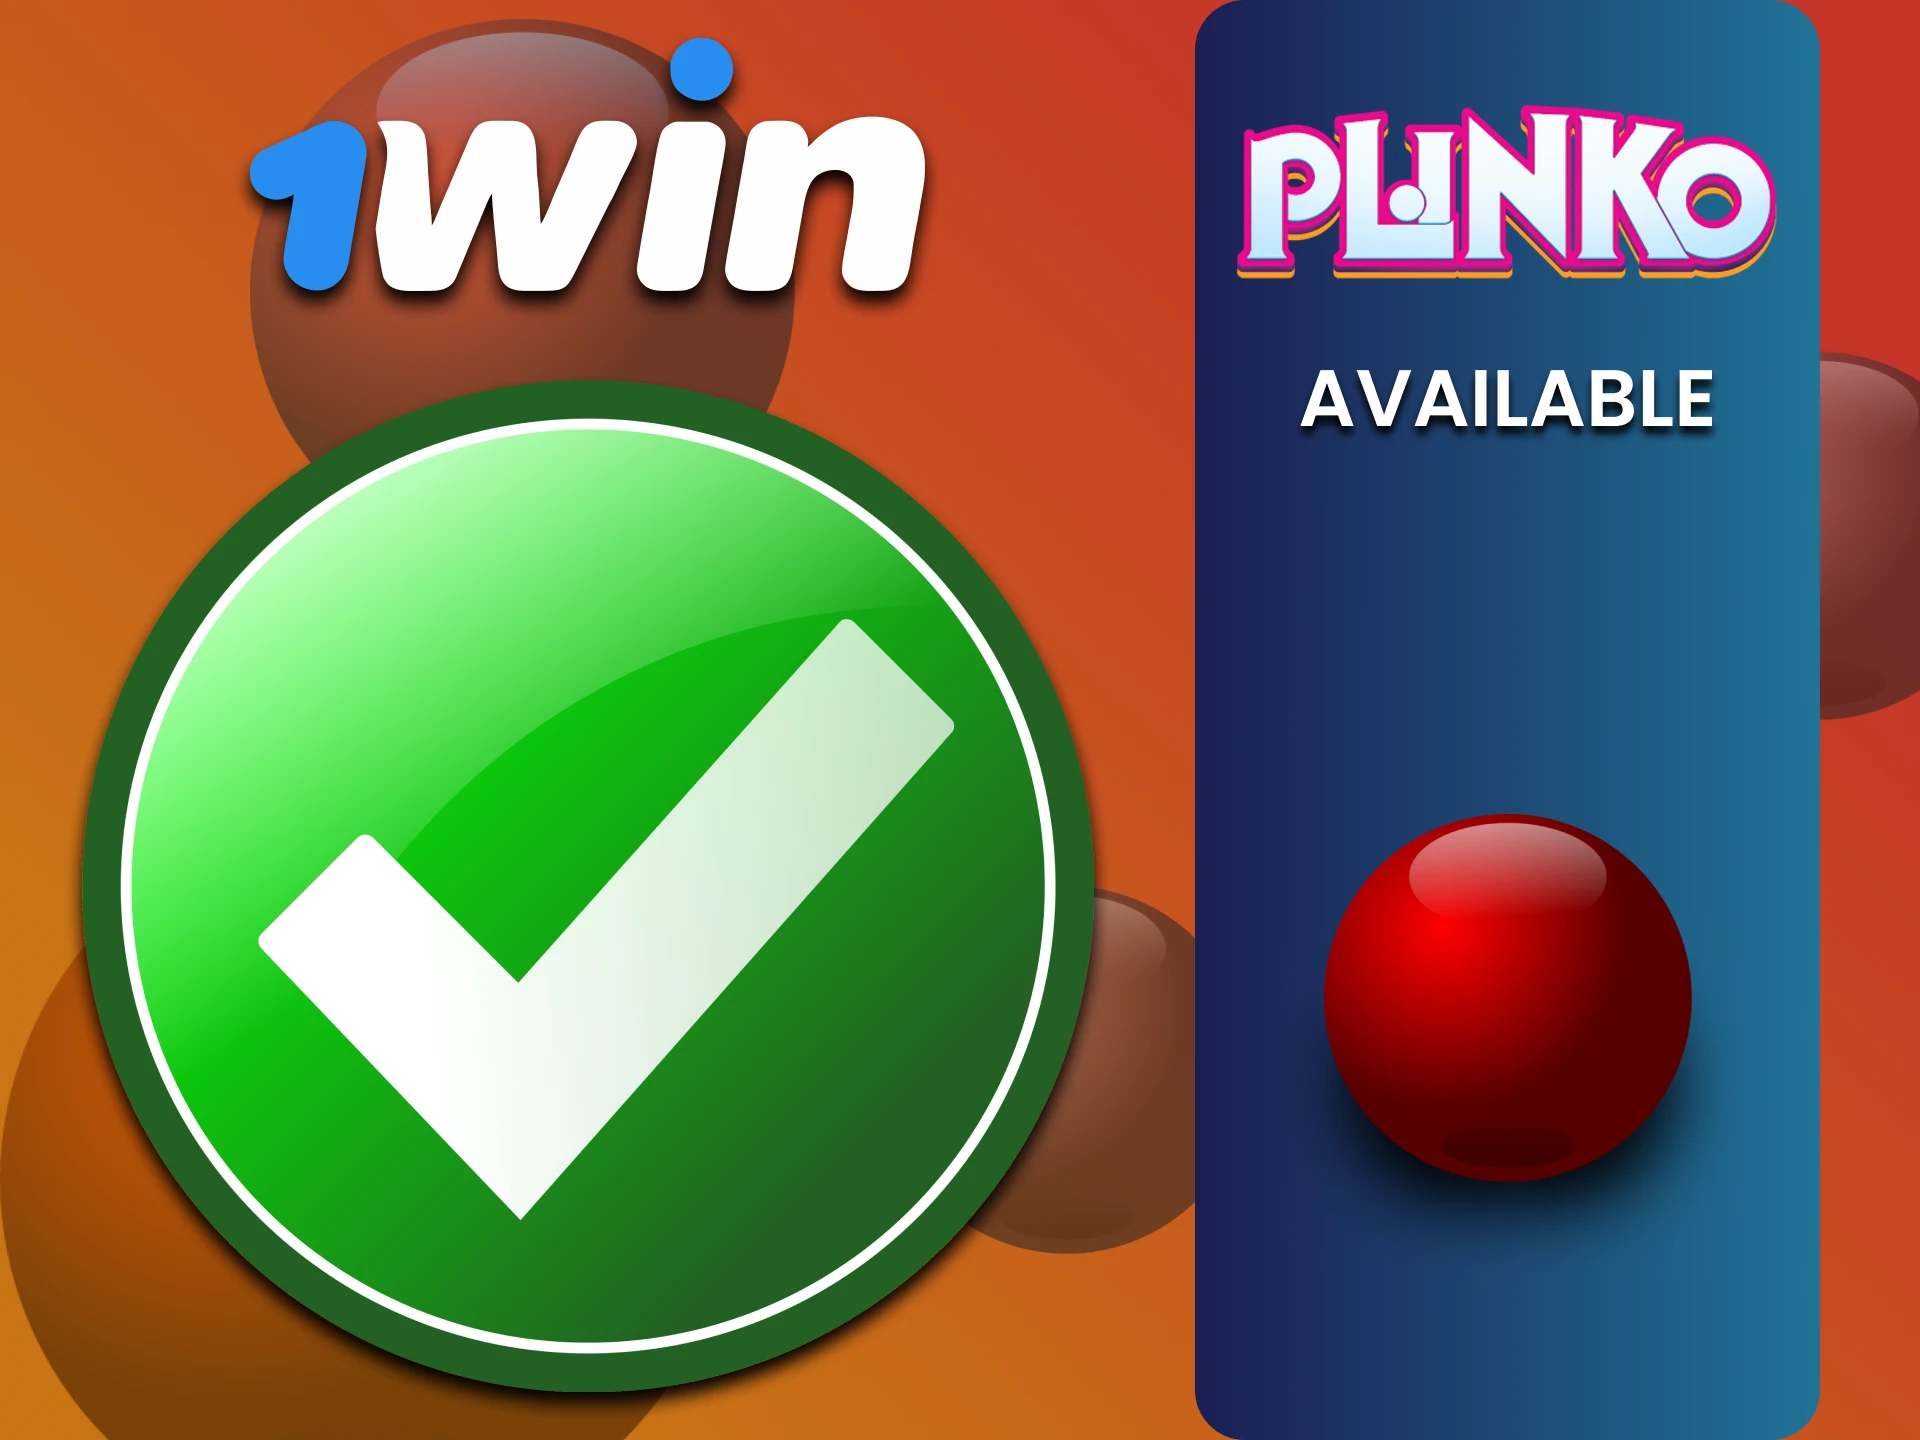 Choose your Plinko option from those available on the 1win website.